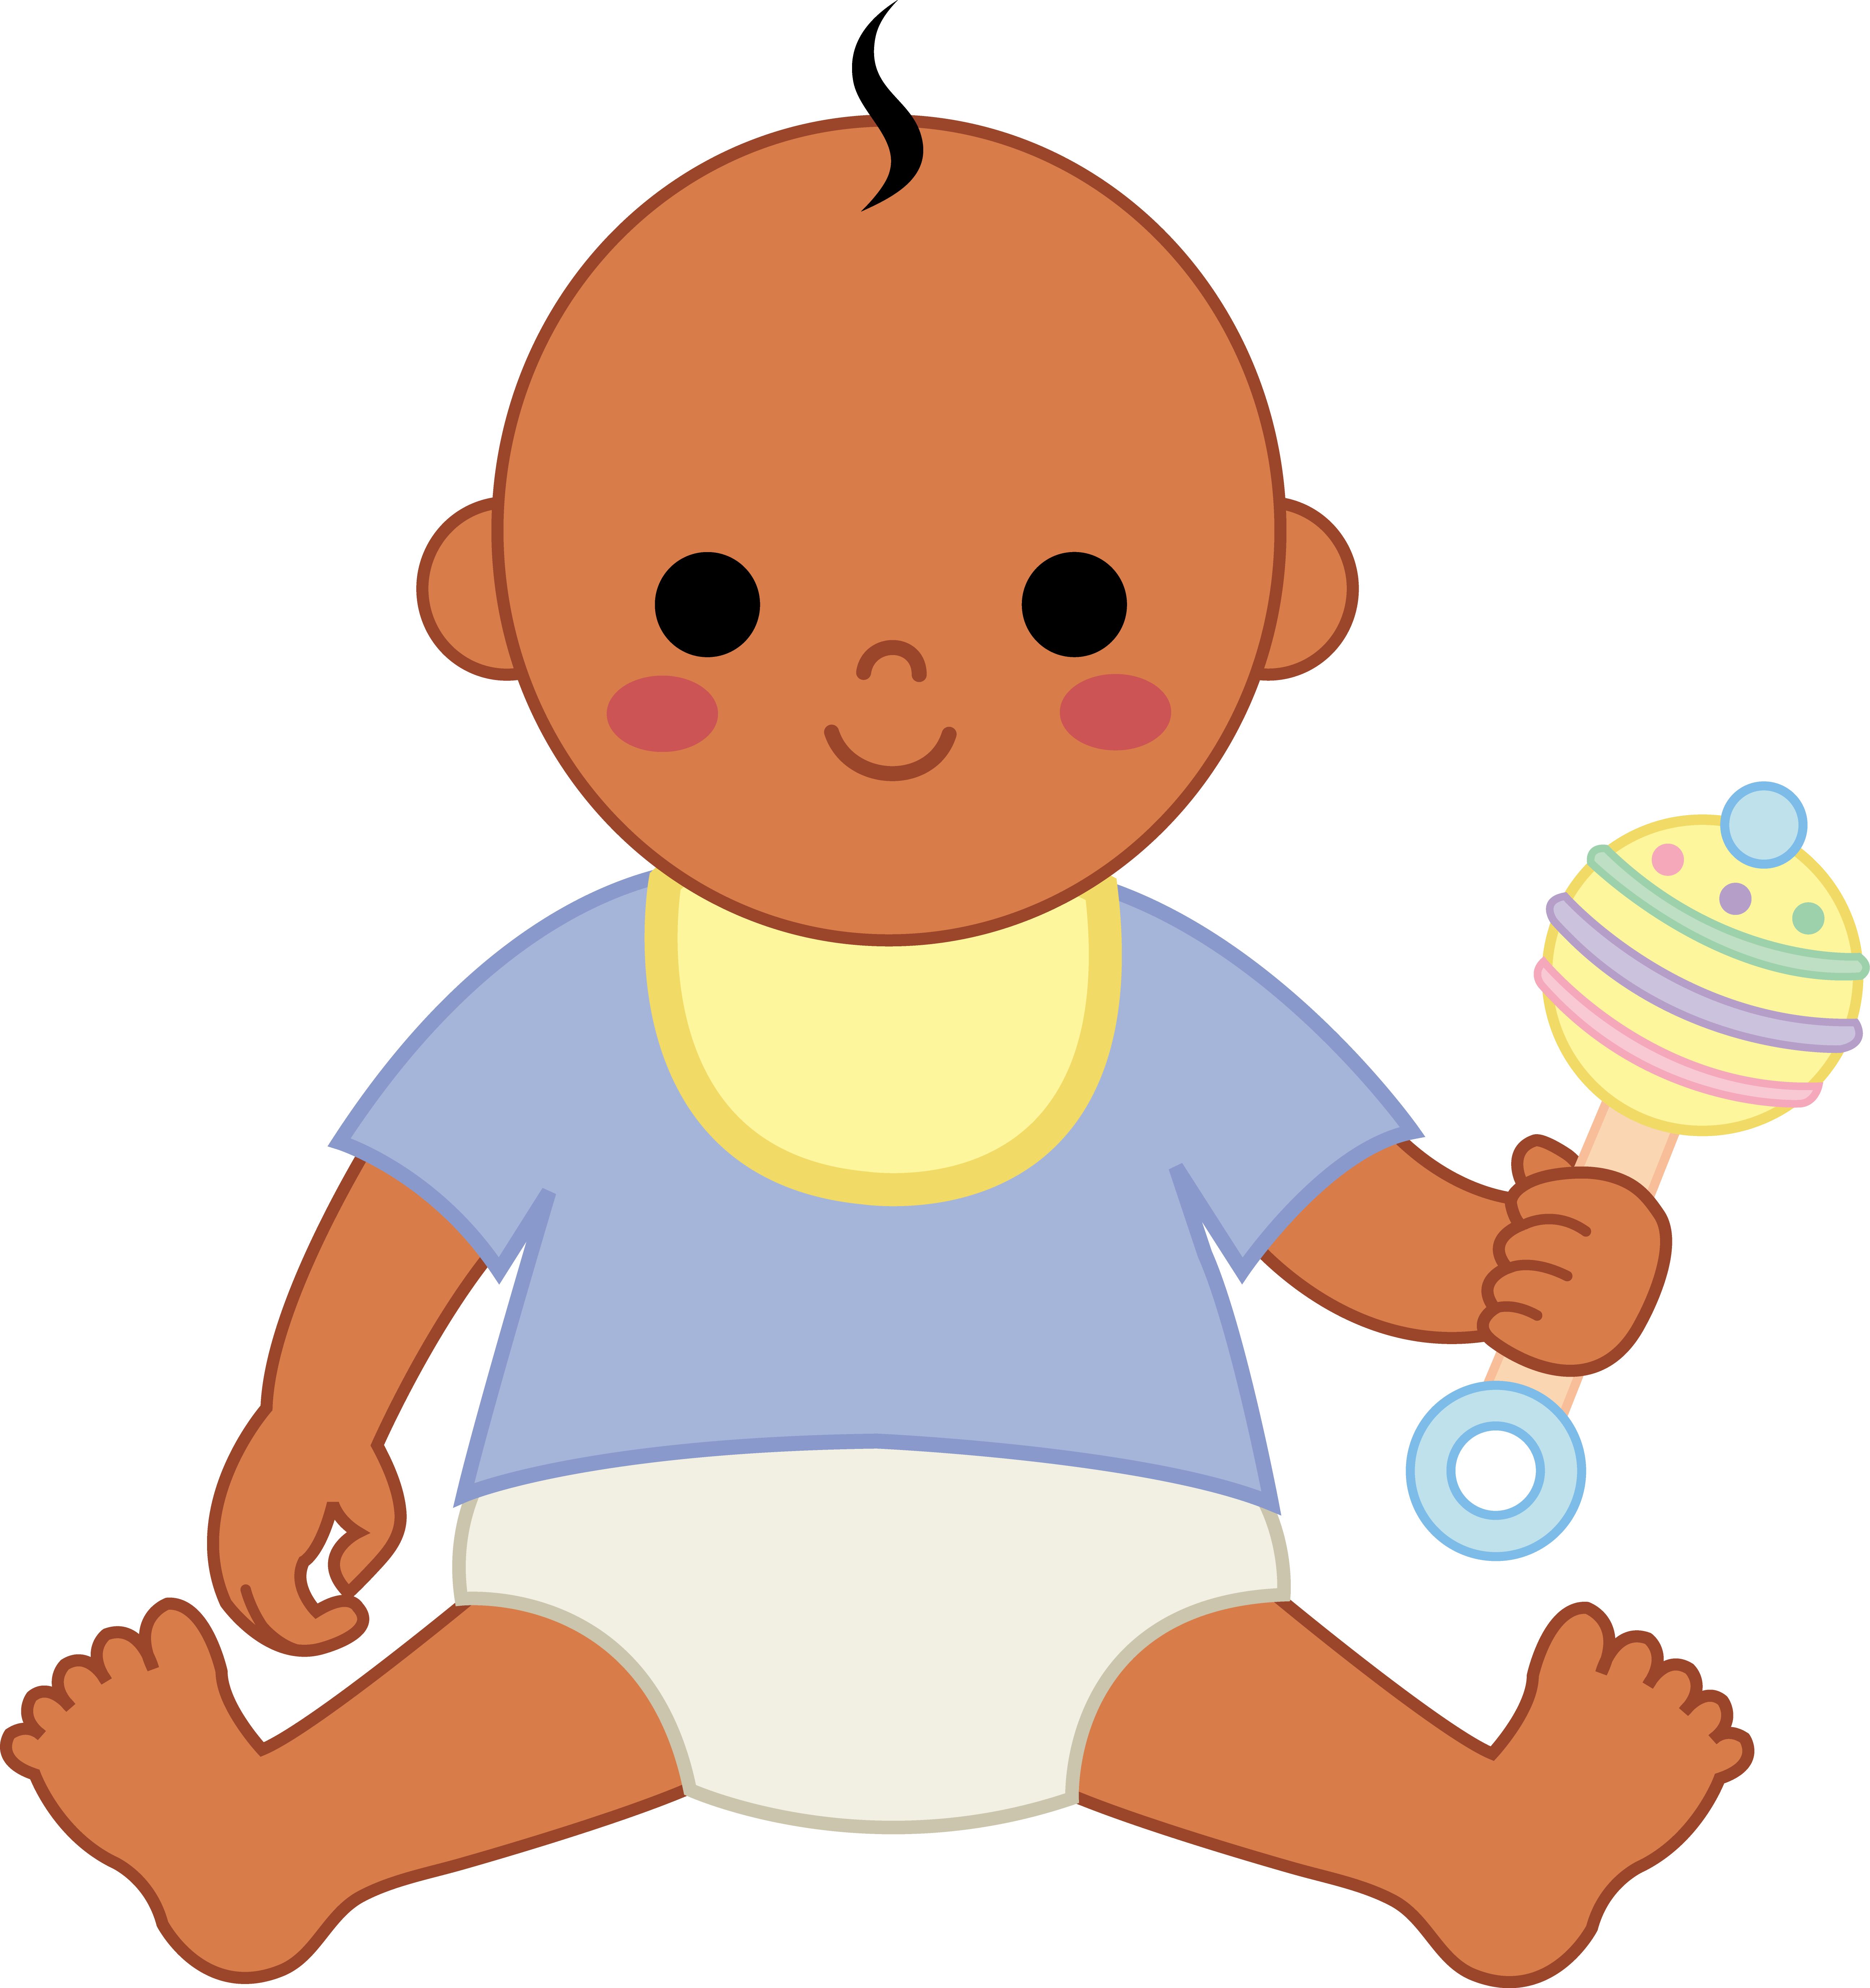 clipart of baby - photo #22